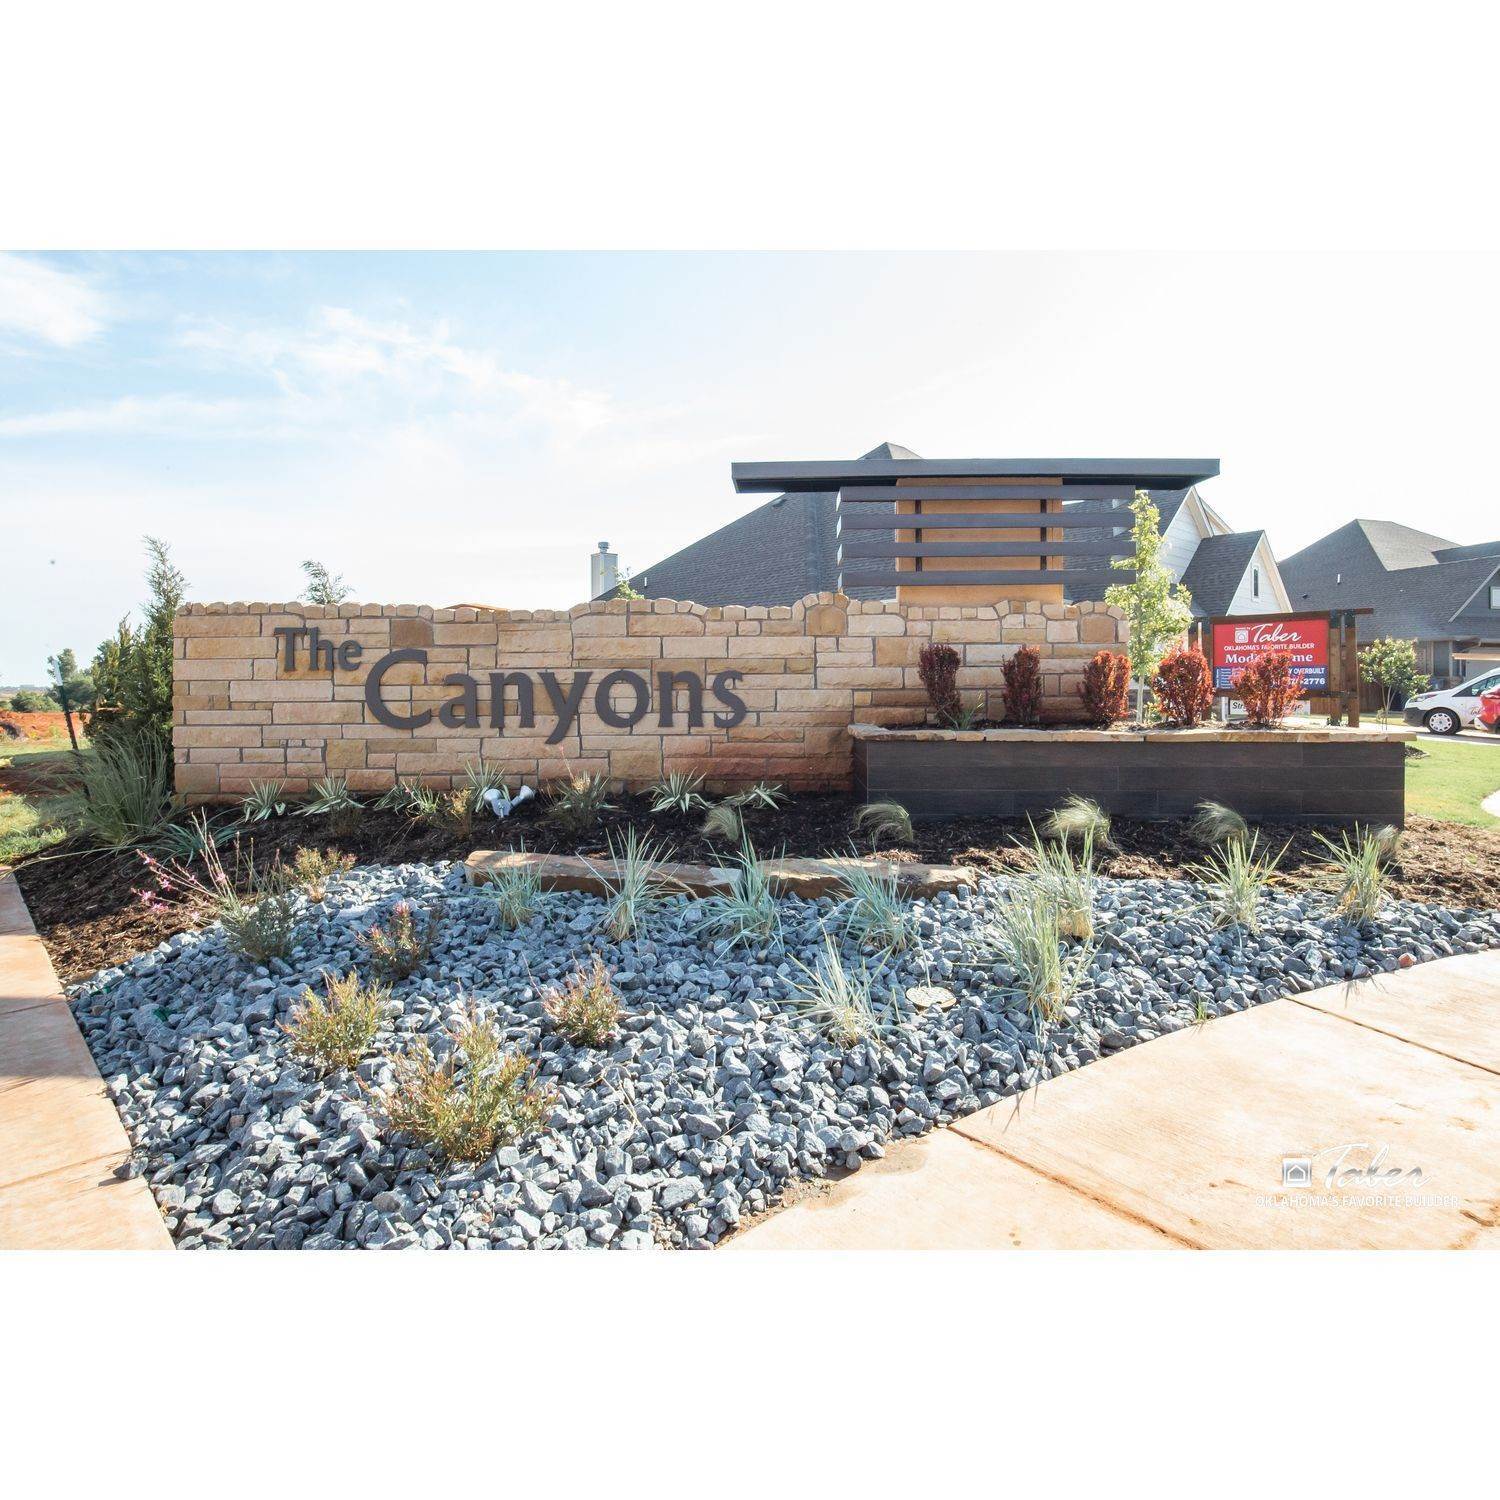 49. Canyons建于 10533 SW 52nd St, Mustang, OK 73064